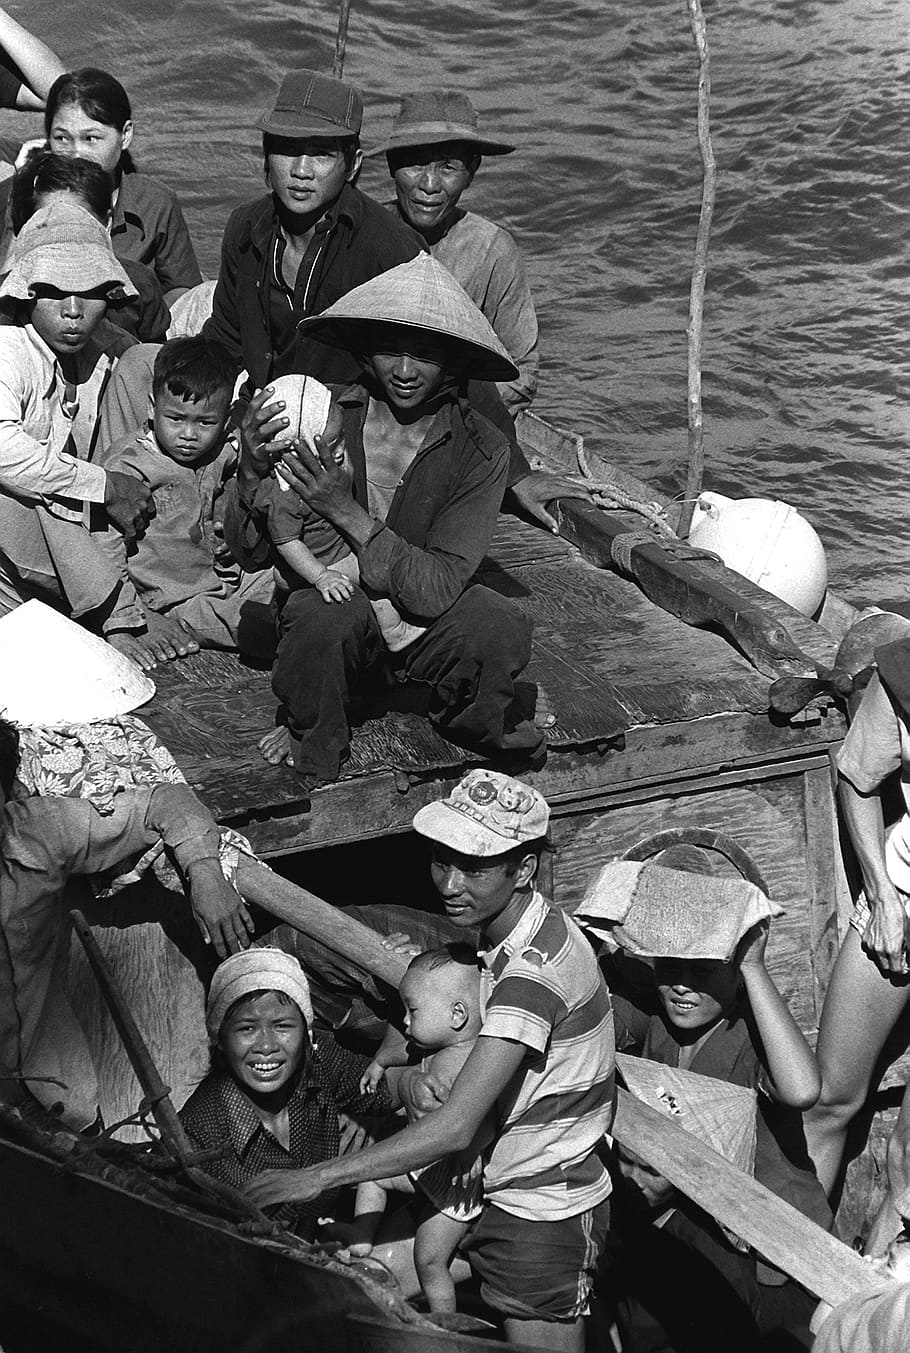 group of people riding boat, boat people, 35 vietnamese refugees, HD wallpaper